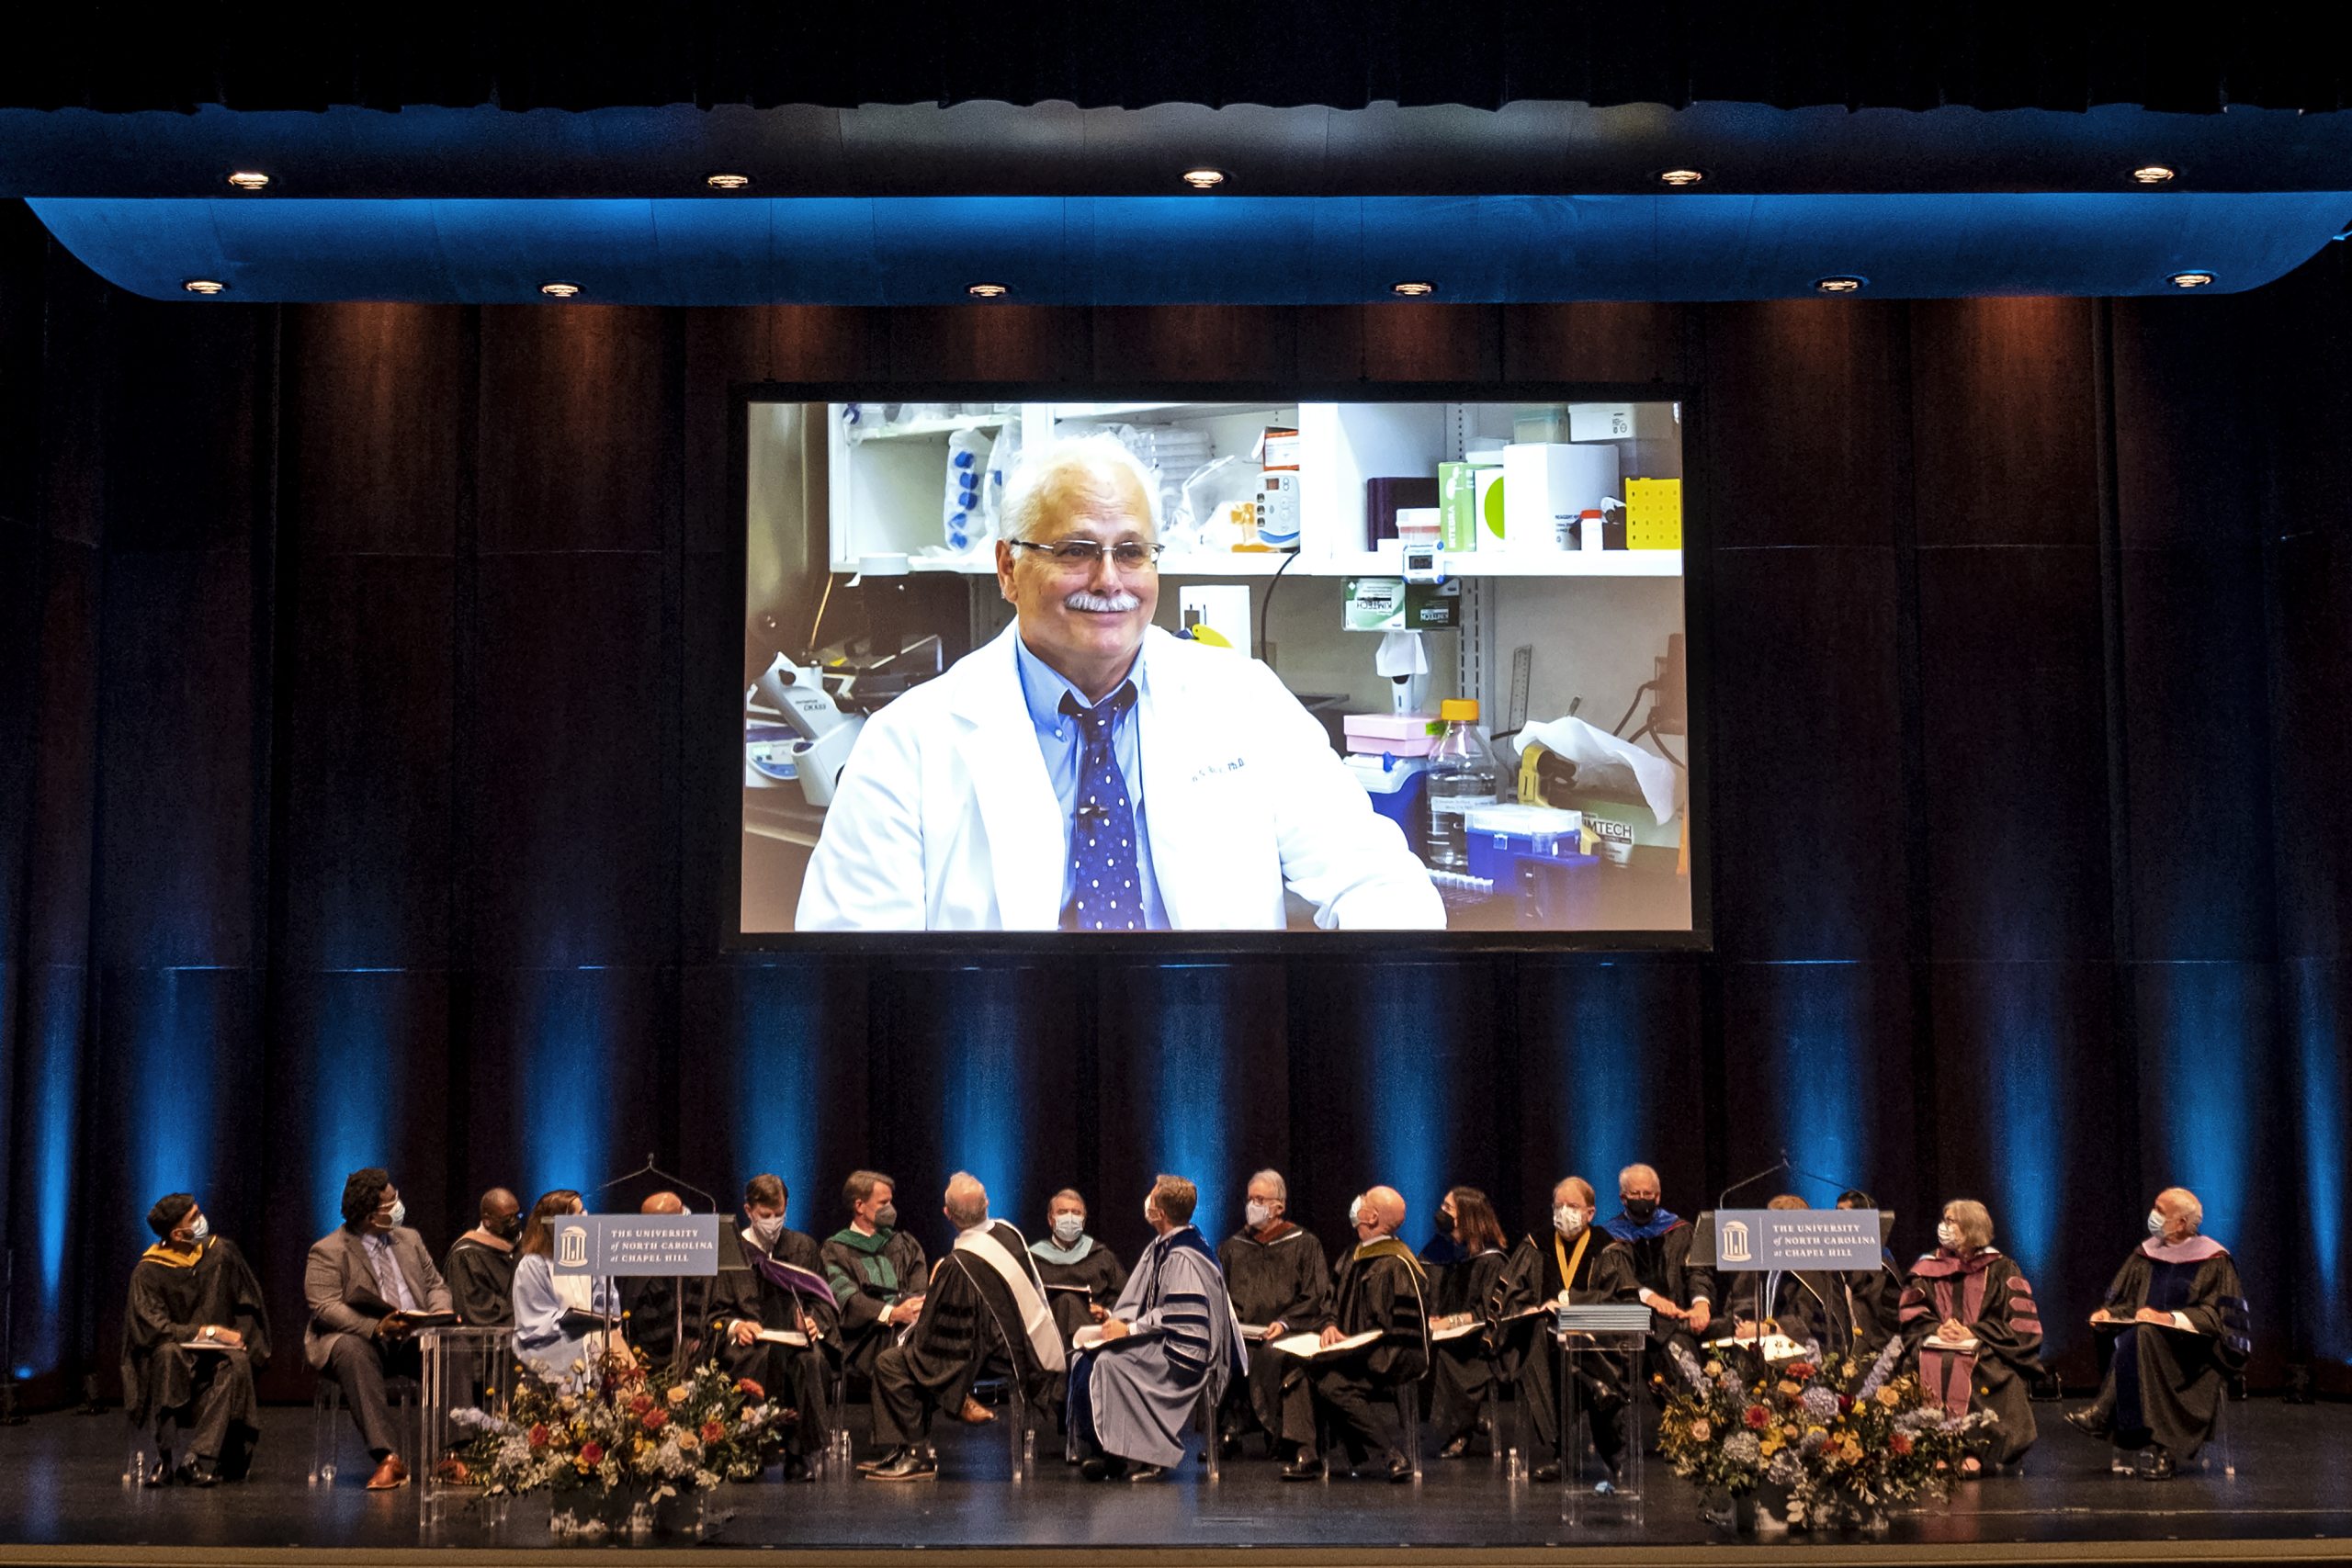 A short video introduced Ralph Baric, recipient of the UNC System’s highest honor, the O. Max Gardner Award.